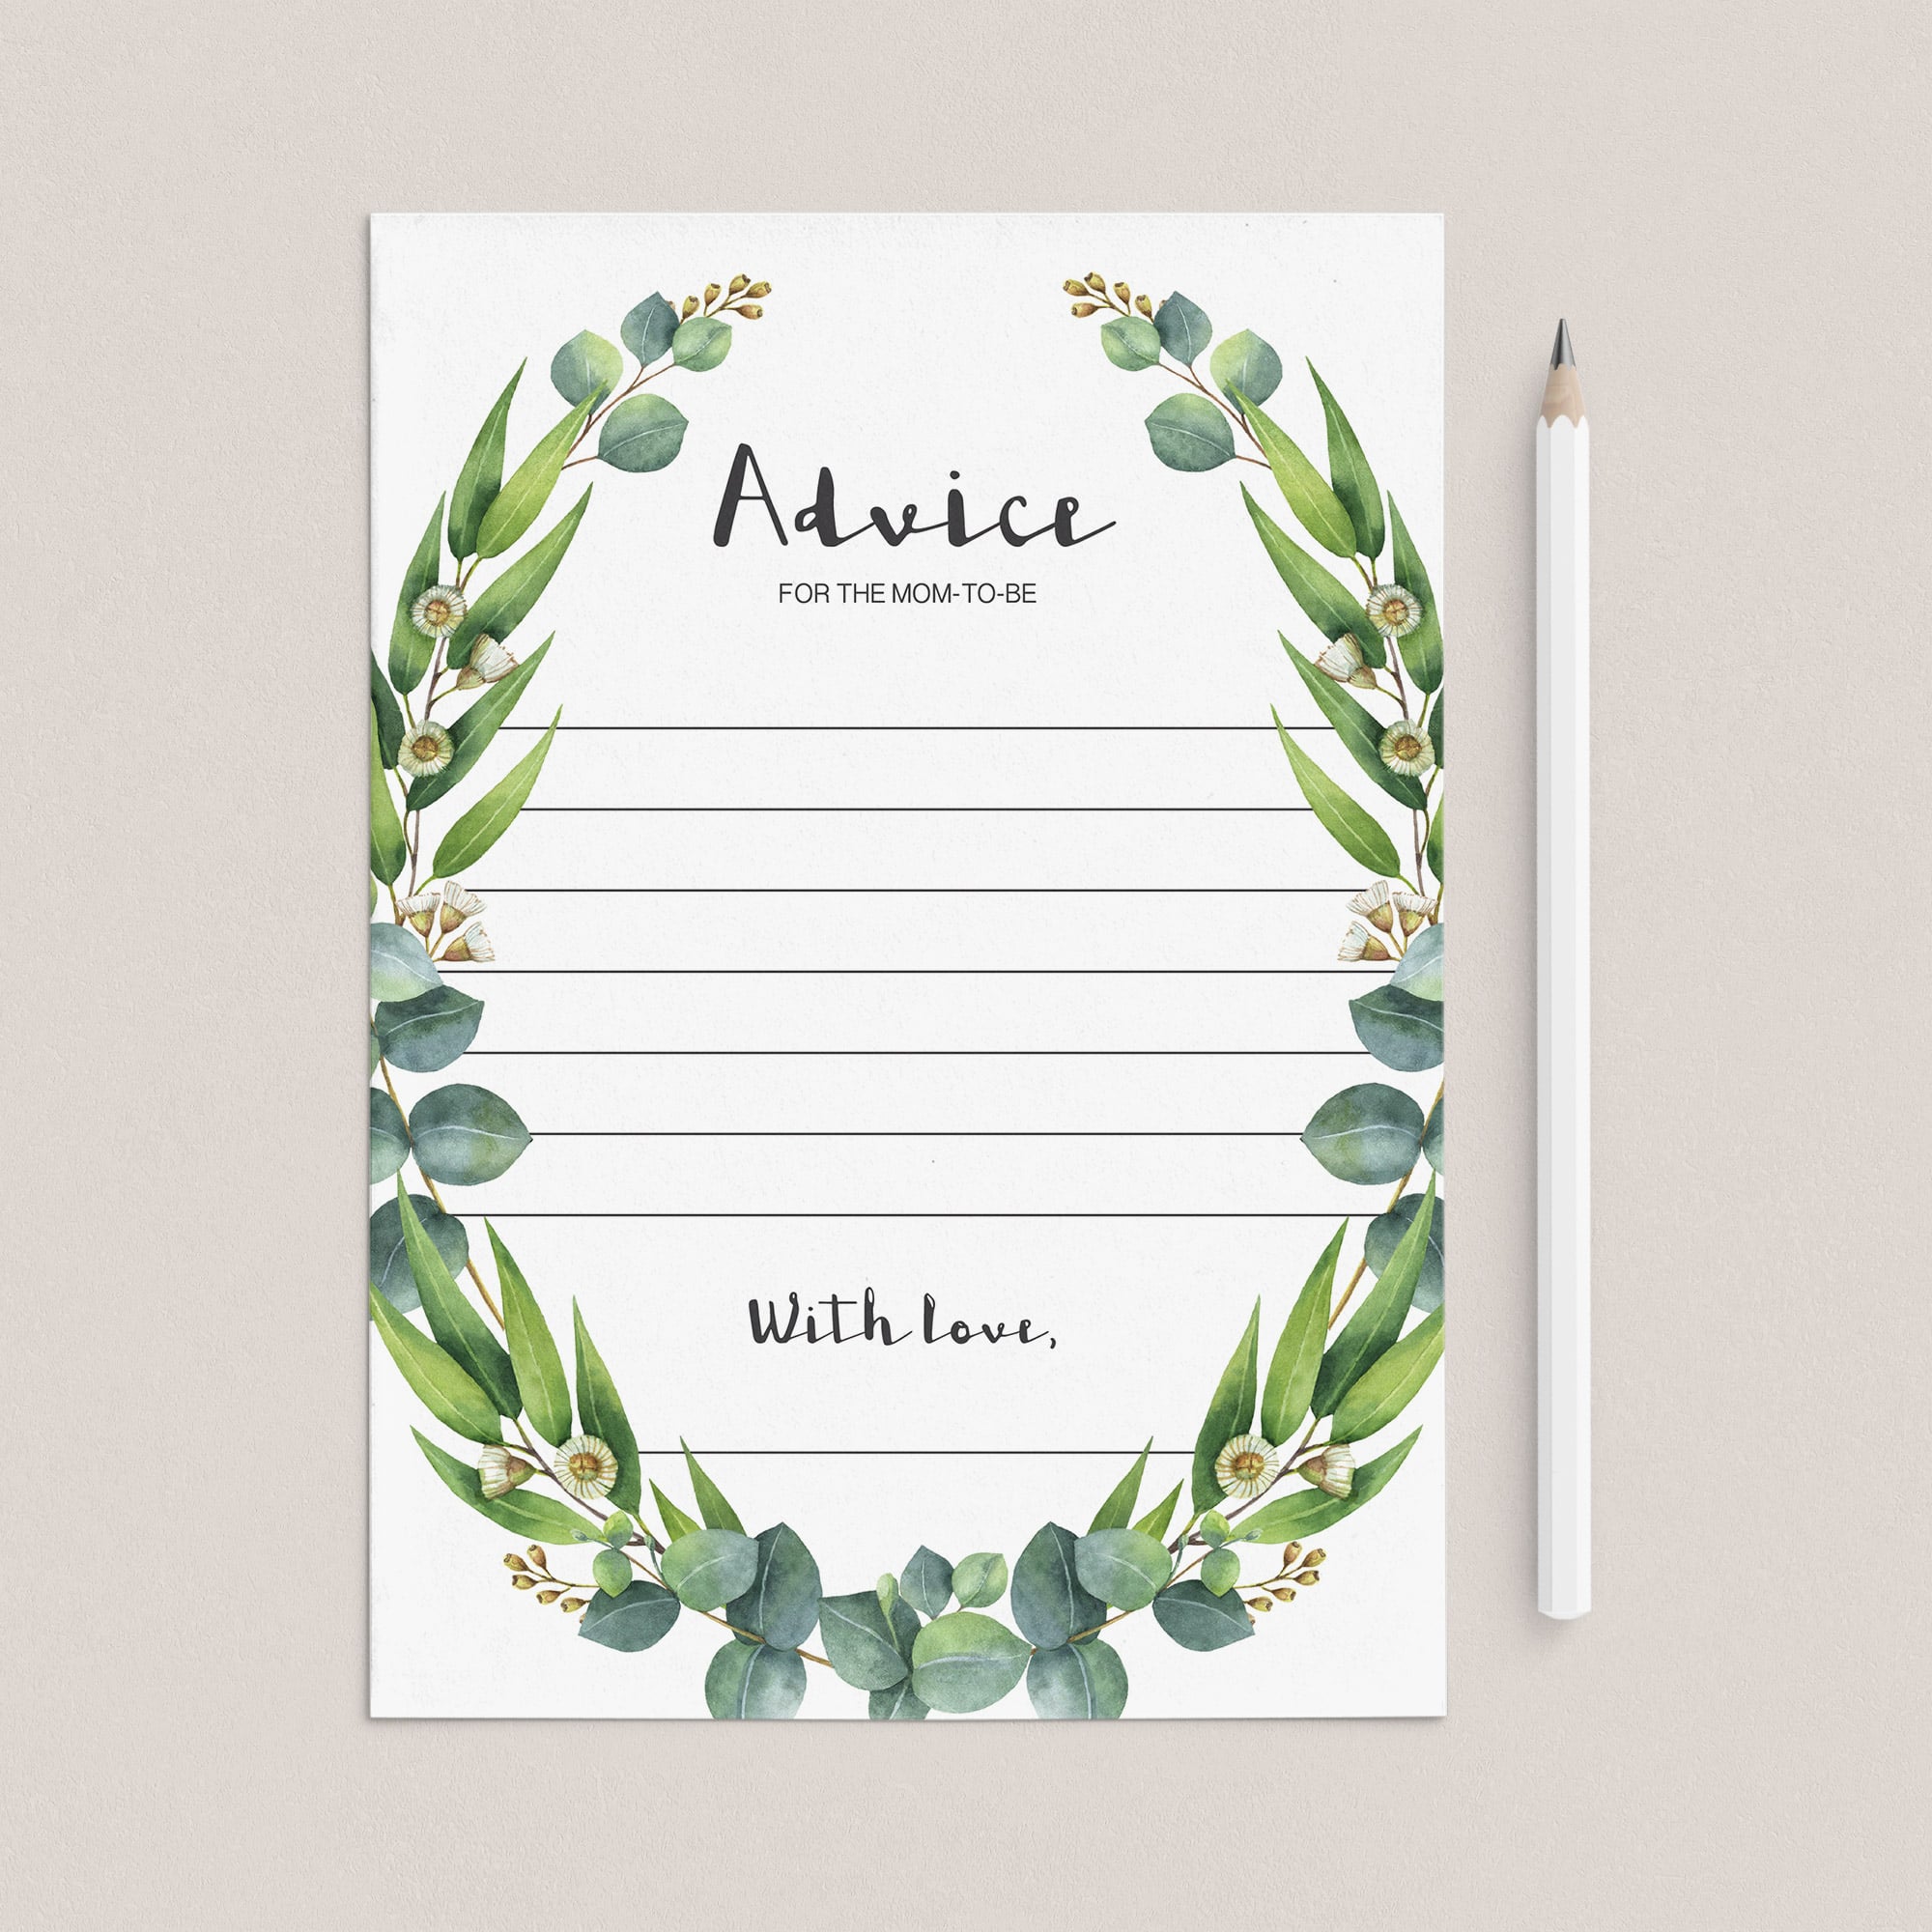 Green leaf baby advice cards printable by LittleSizzle